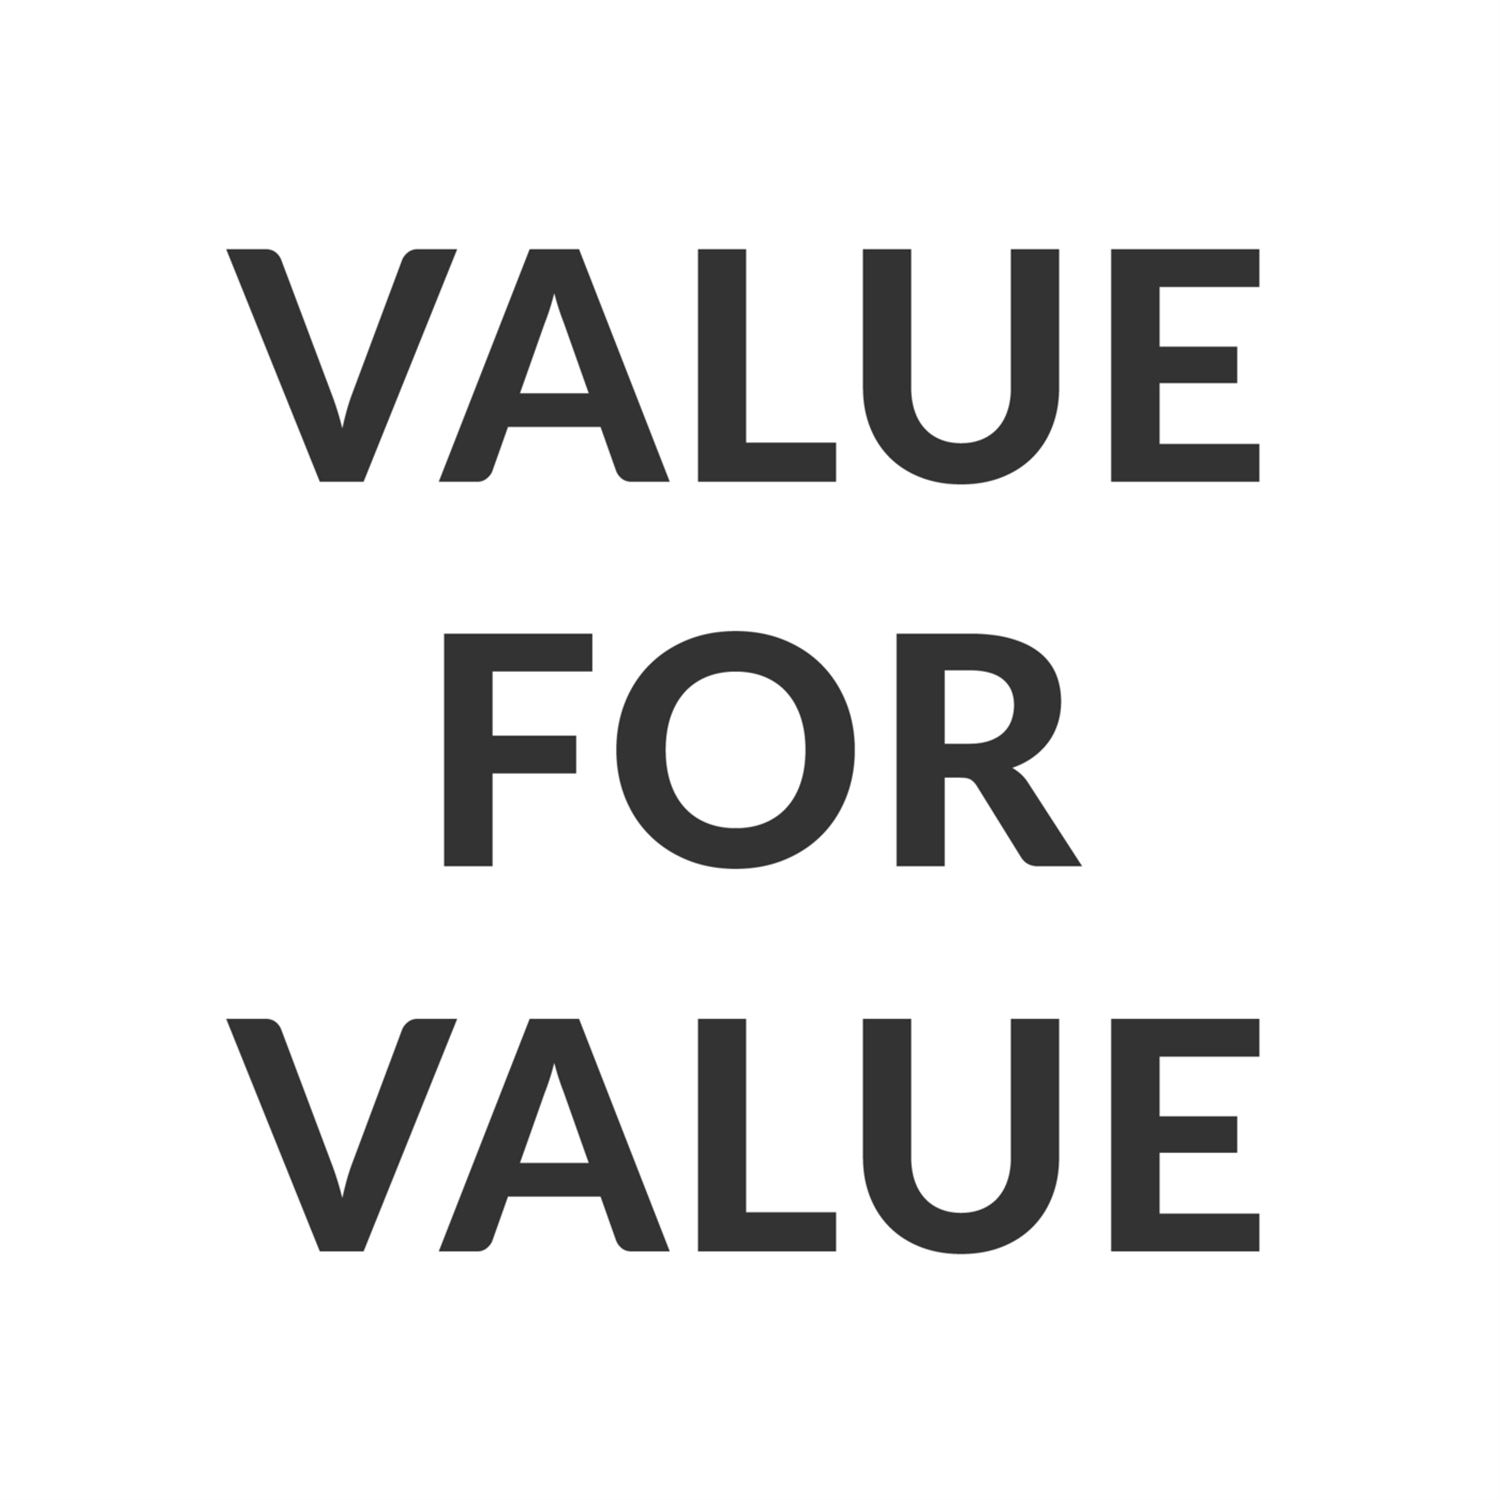 Value for value: Show your status!